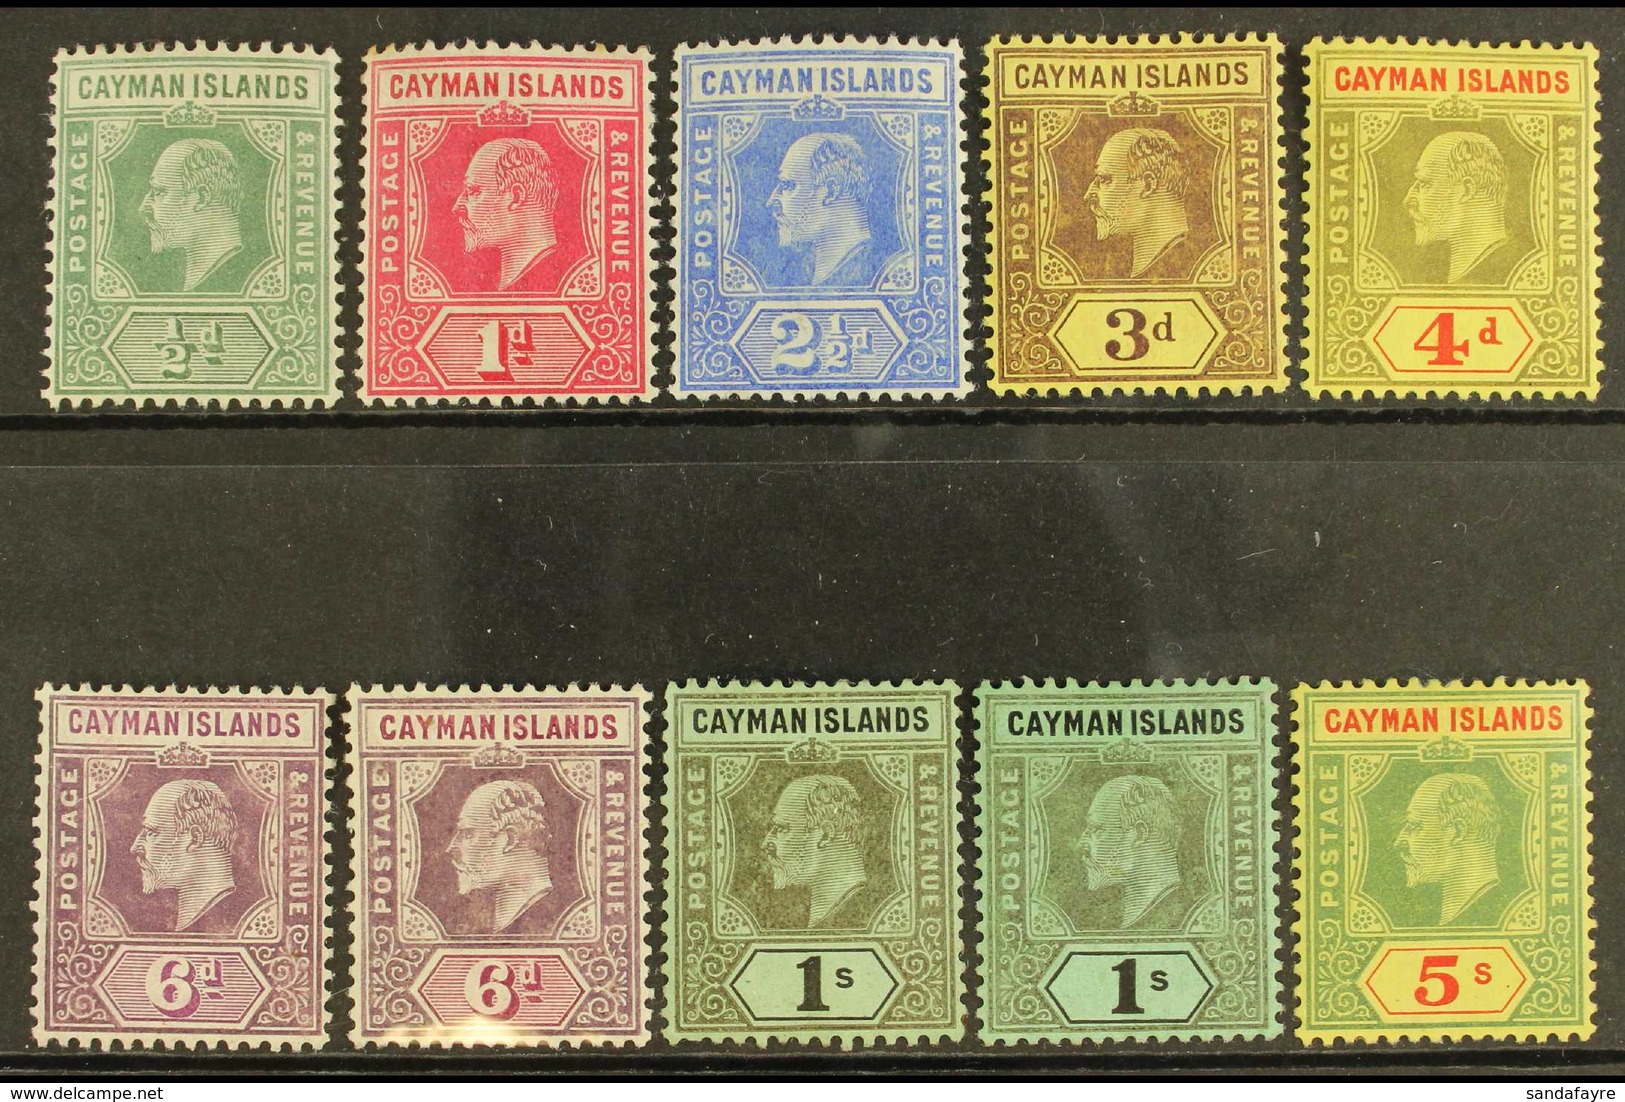 1907-09 KEVII Set To 5s, SG 25/33, Including 6d Both Listed Shades And 1s Both Watermarks, Fine Mint. (10 Stamps) For Mo - Iles Caïmans